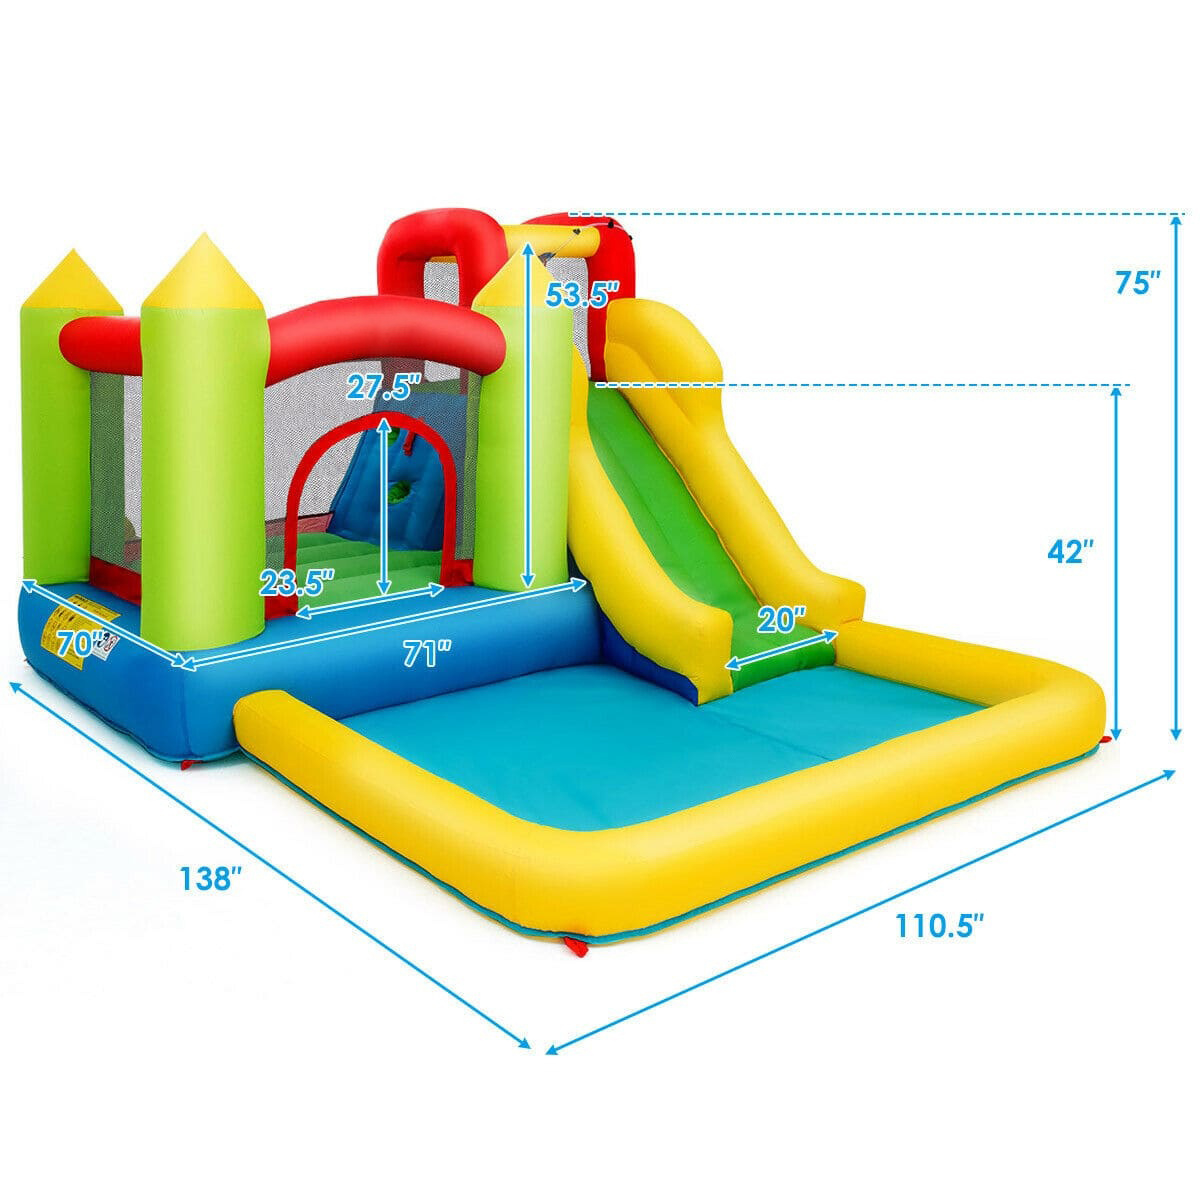 Inflatable Bounce House Waterpark Pool with Slide and 480W Air Blower